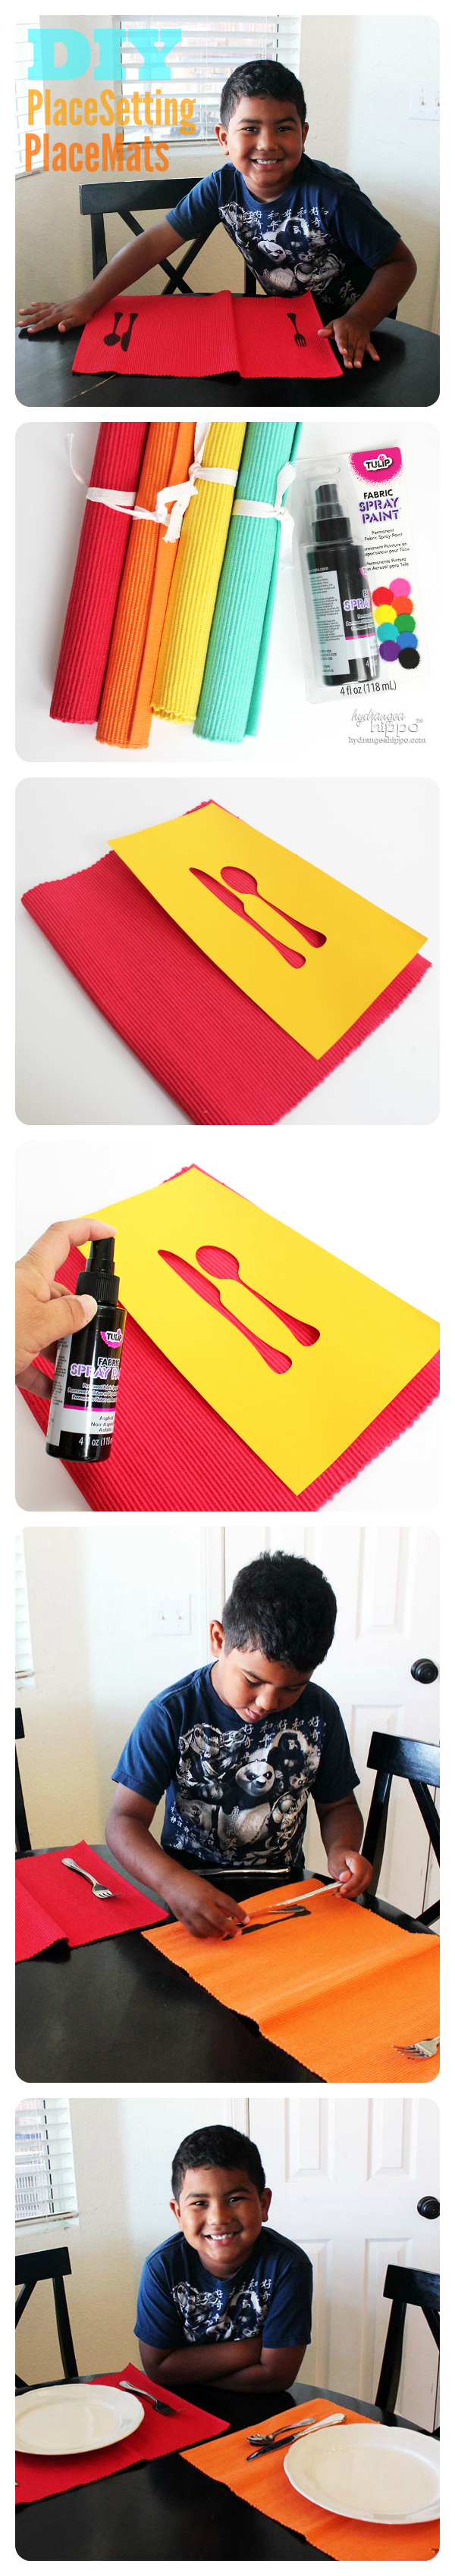 Setting the Table - DIY Placemats Project for Kids - TITLE